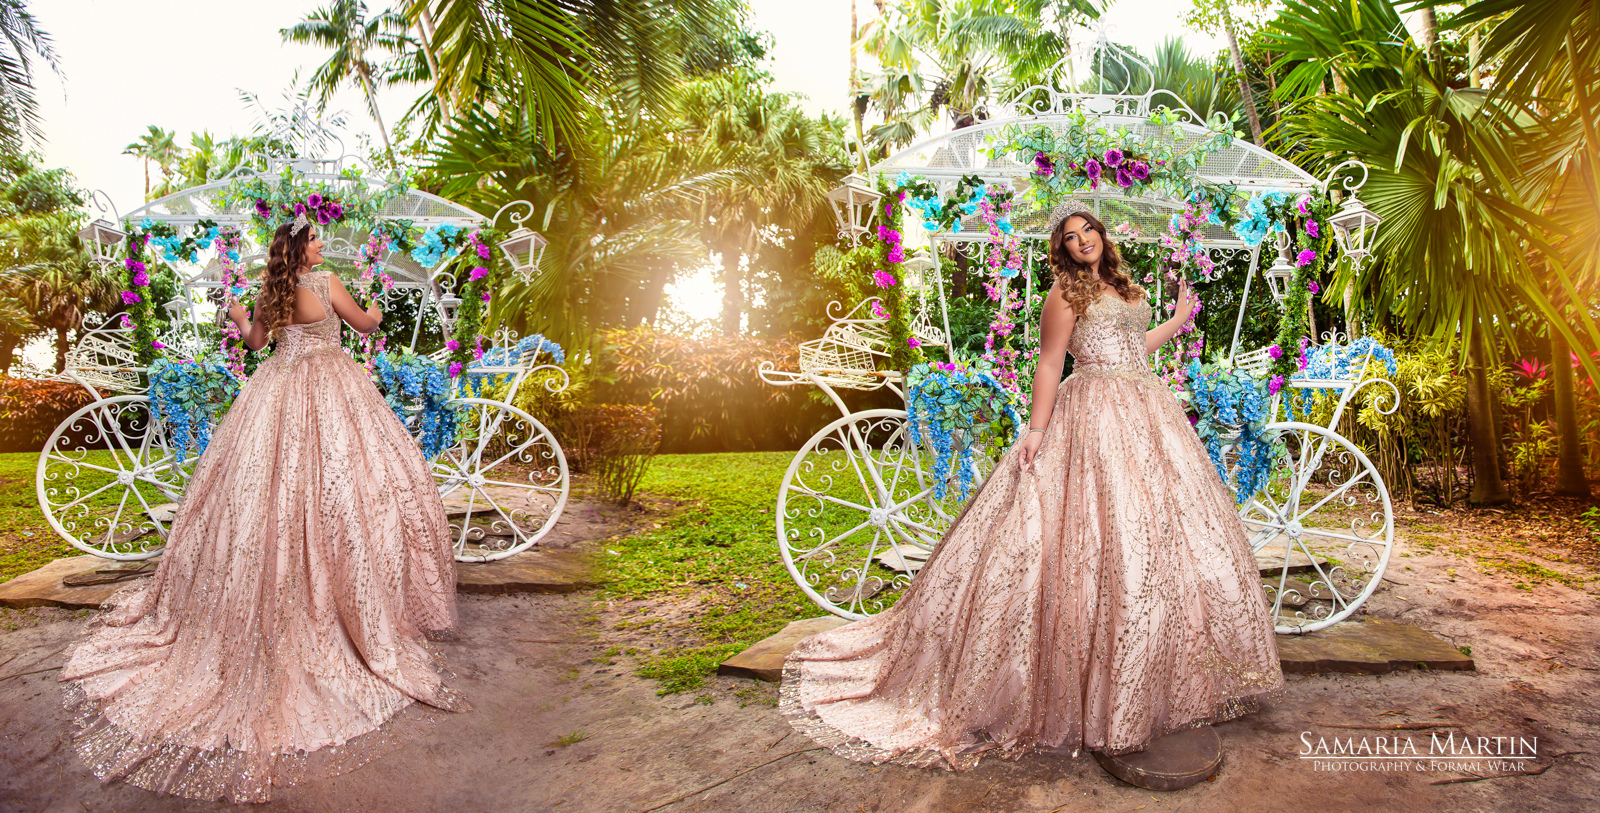 Fashion photoshoot, best quinceanera pictures in Miami, Samaria Martin Photographer, where to rent quinceanera dresses, quinceanera dress collection 3